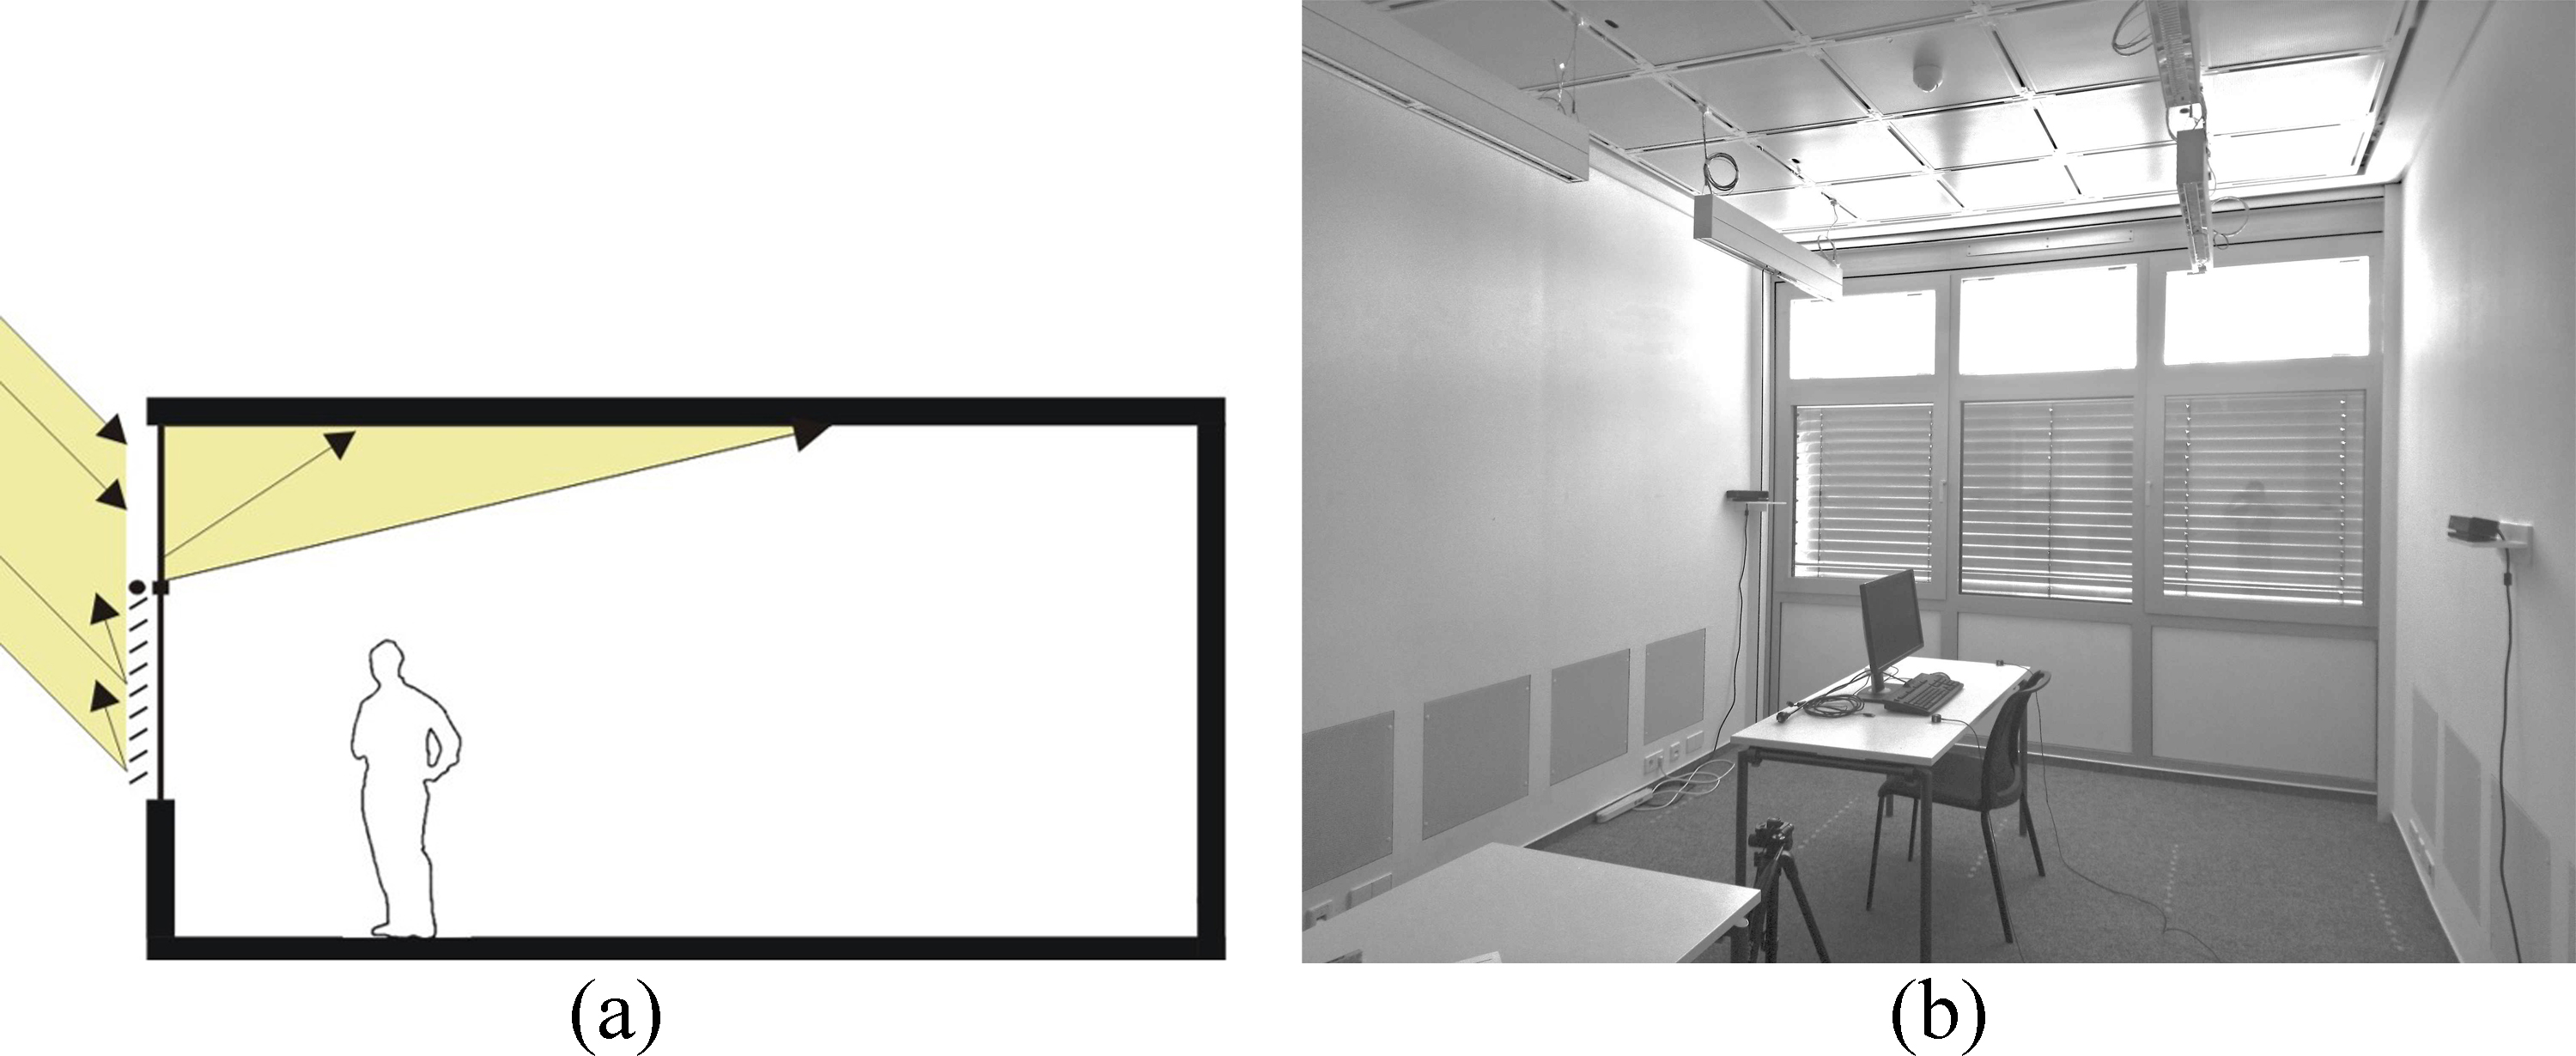 (a) Principle of redirecting solar light from the upper window area to a reflecting ceiling and deep into the room. Solar protection in the lower window area, e.g. shading or glass coating. (b) Prototypes in test-room of Fraunhofer IBP, Stuttgart.